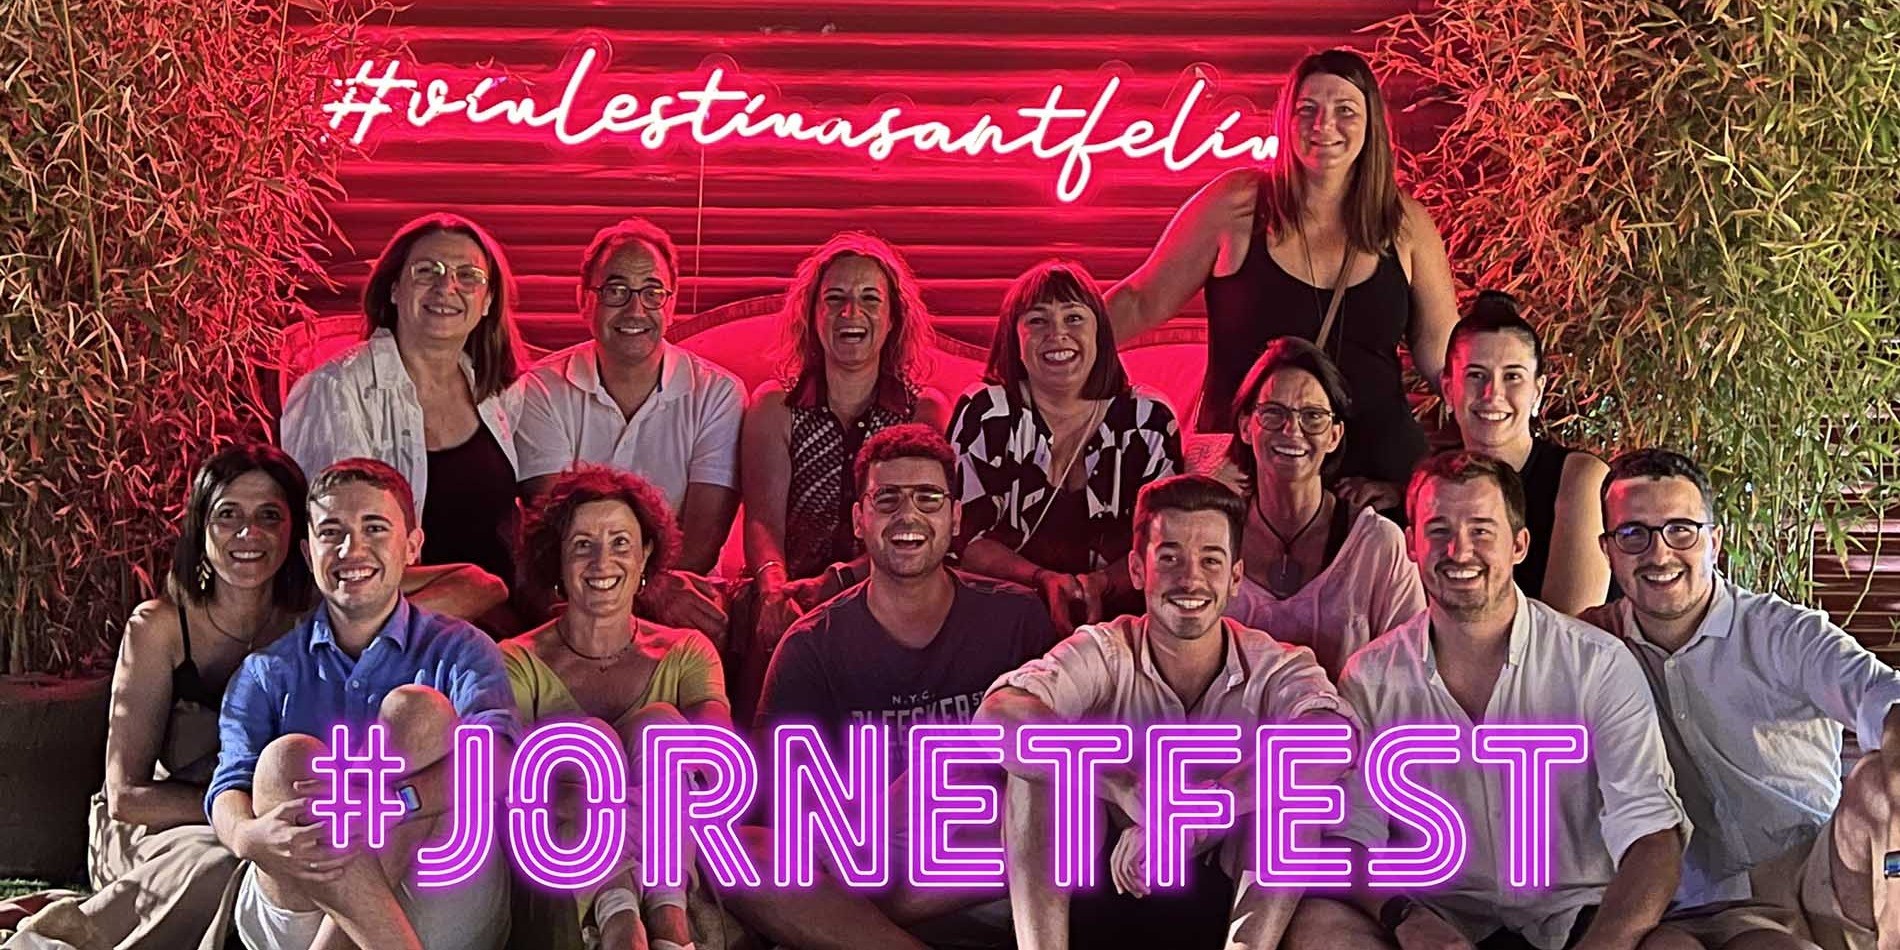 Helena Jornet Finques celebrates life with clients, friends and collaborators in the first #JornetFest!